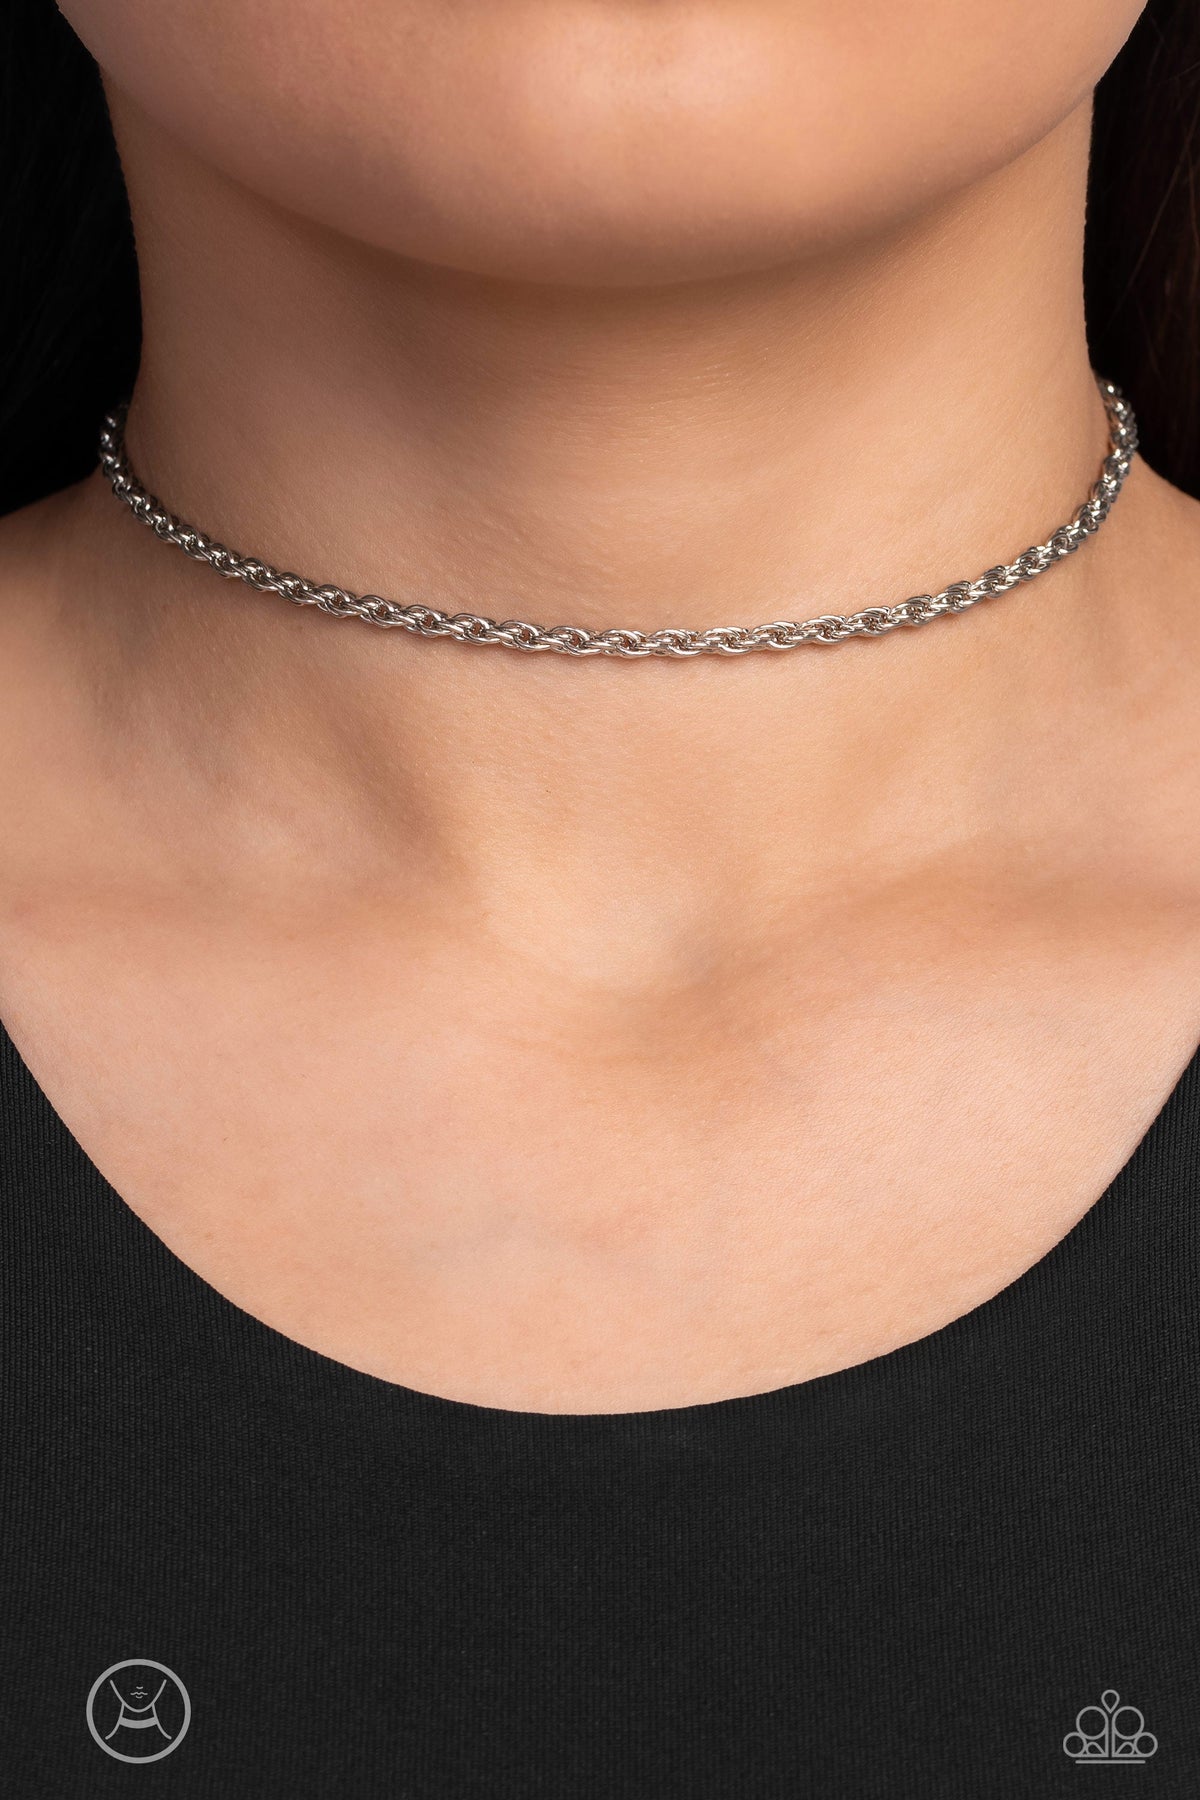 Glimmer of ROPE Silver Choker Necklace - Paparazzi Accessories-on model - CarasShop.com - $5 Jewelry by Cara Jewels